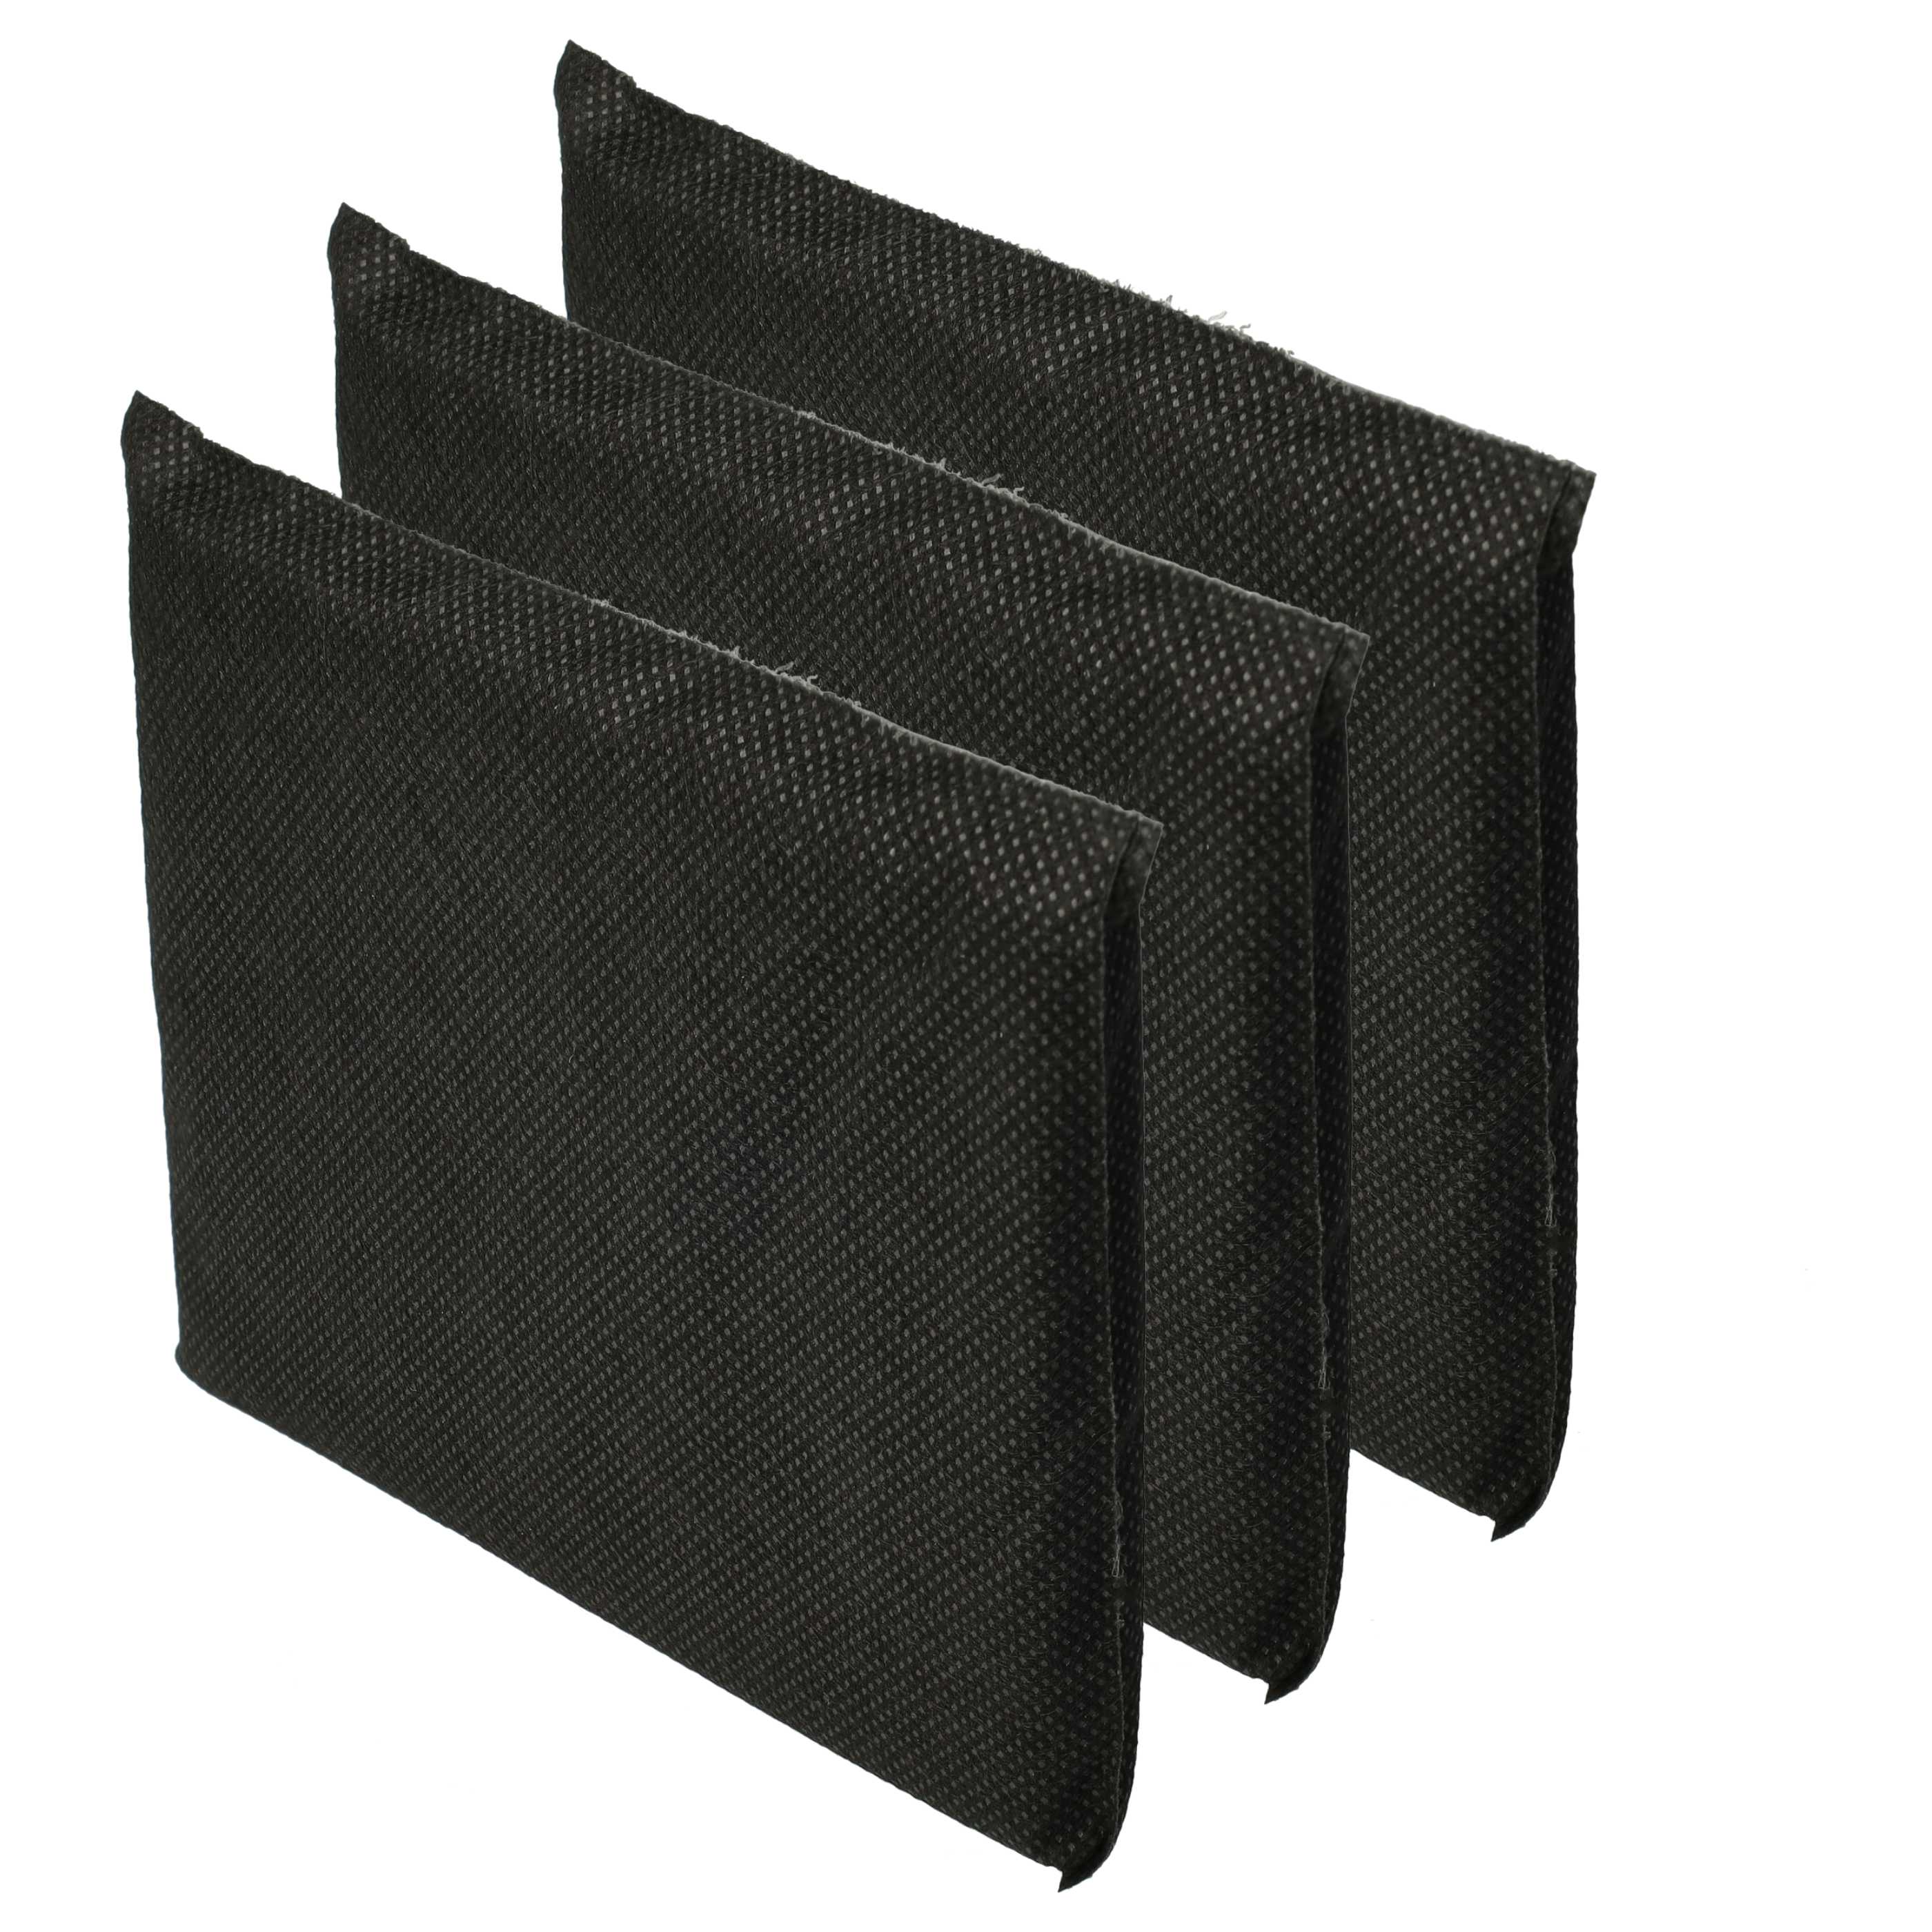 3x Air Filter replaces AEG/Electrolux 2081625036, 2081625010 for Juno Fridge - Activated Carbon